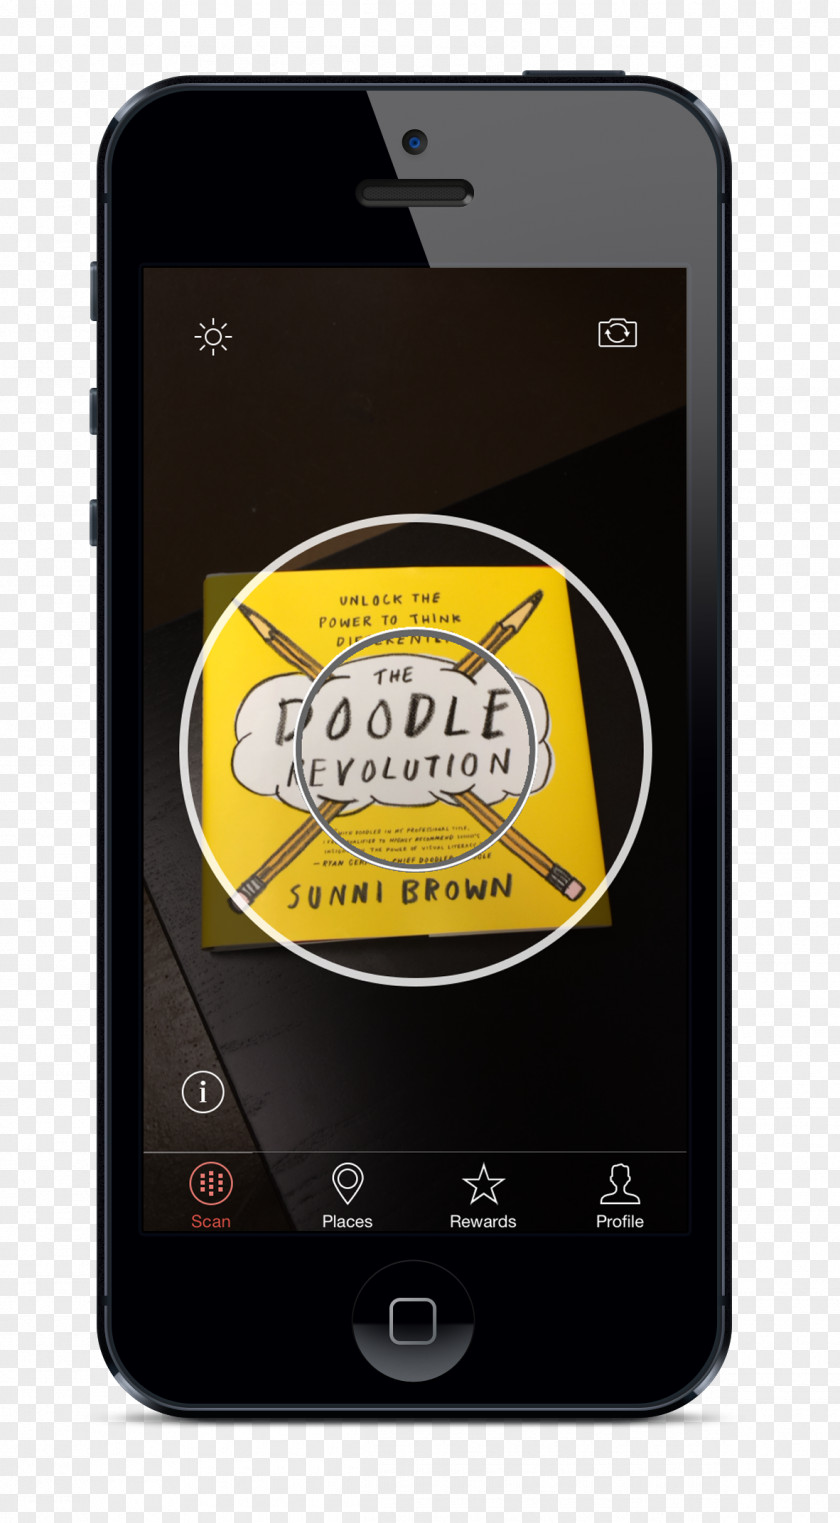 Smartphone Feature Phone The Doodle Revolution: Unlock Power To Think Differently Mobile Accessories PNG